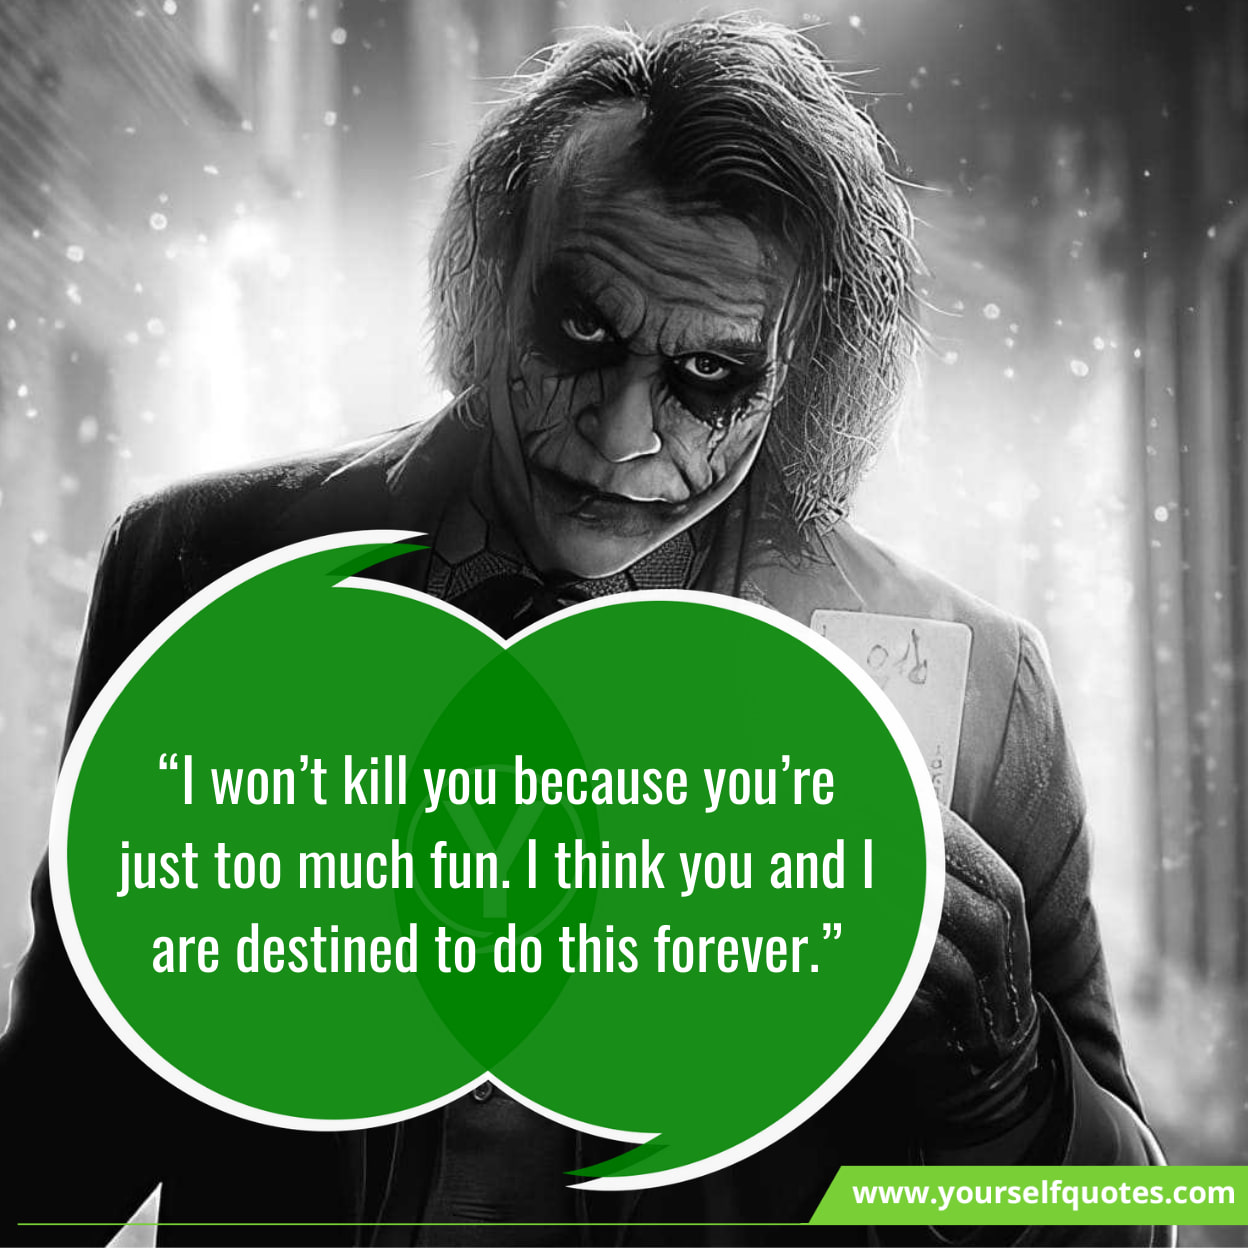 Funny Quotes About Joker